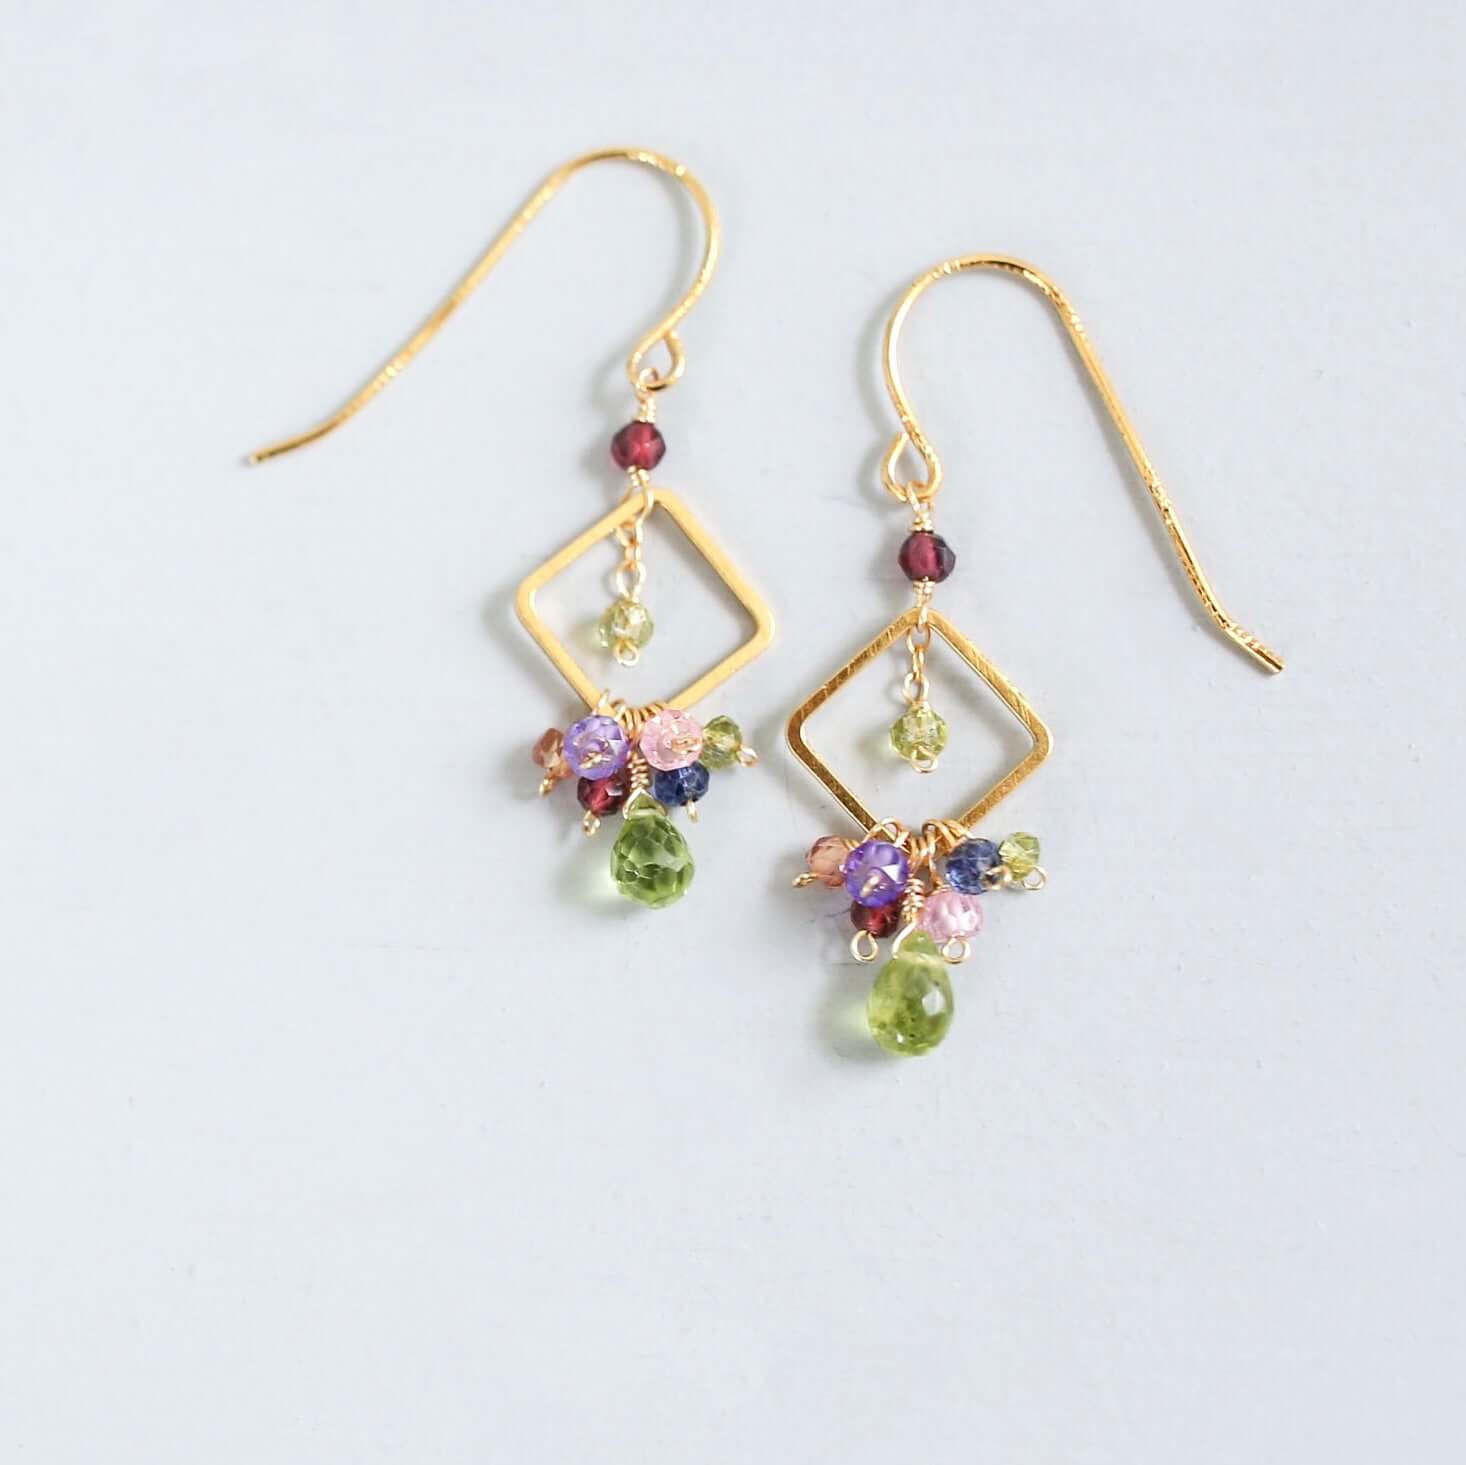 Peridot briolette gemstones with Rainbow Accent gemstones French Hook Gold Earrings